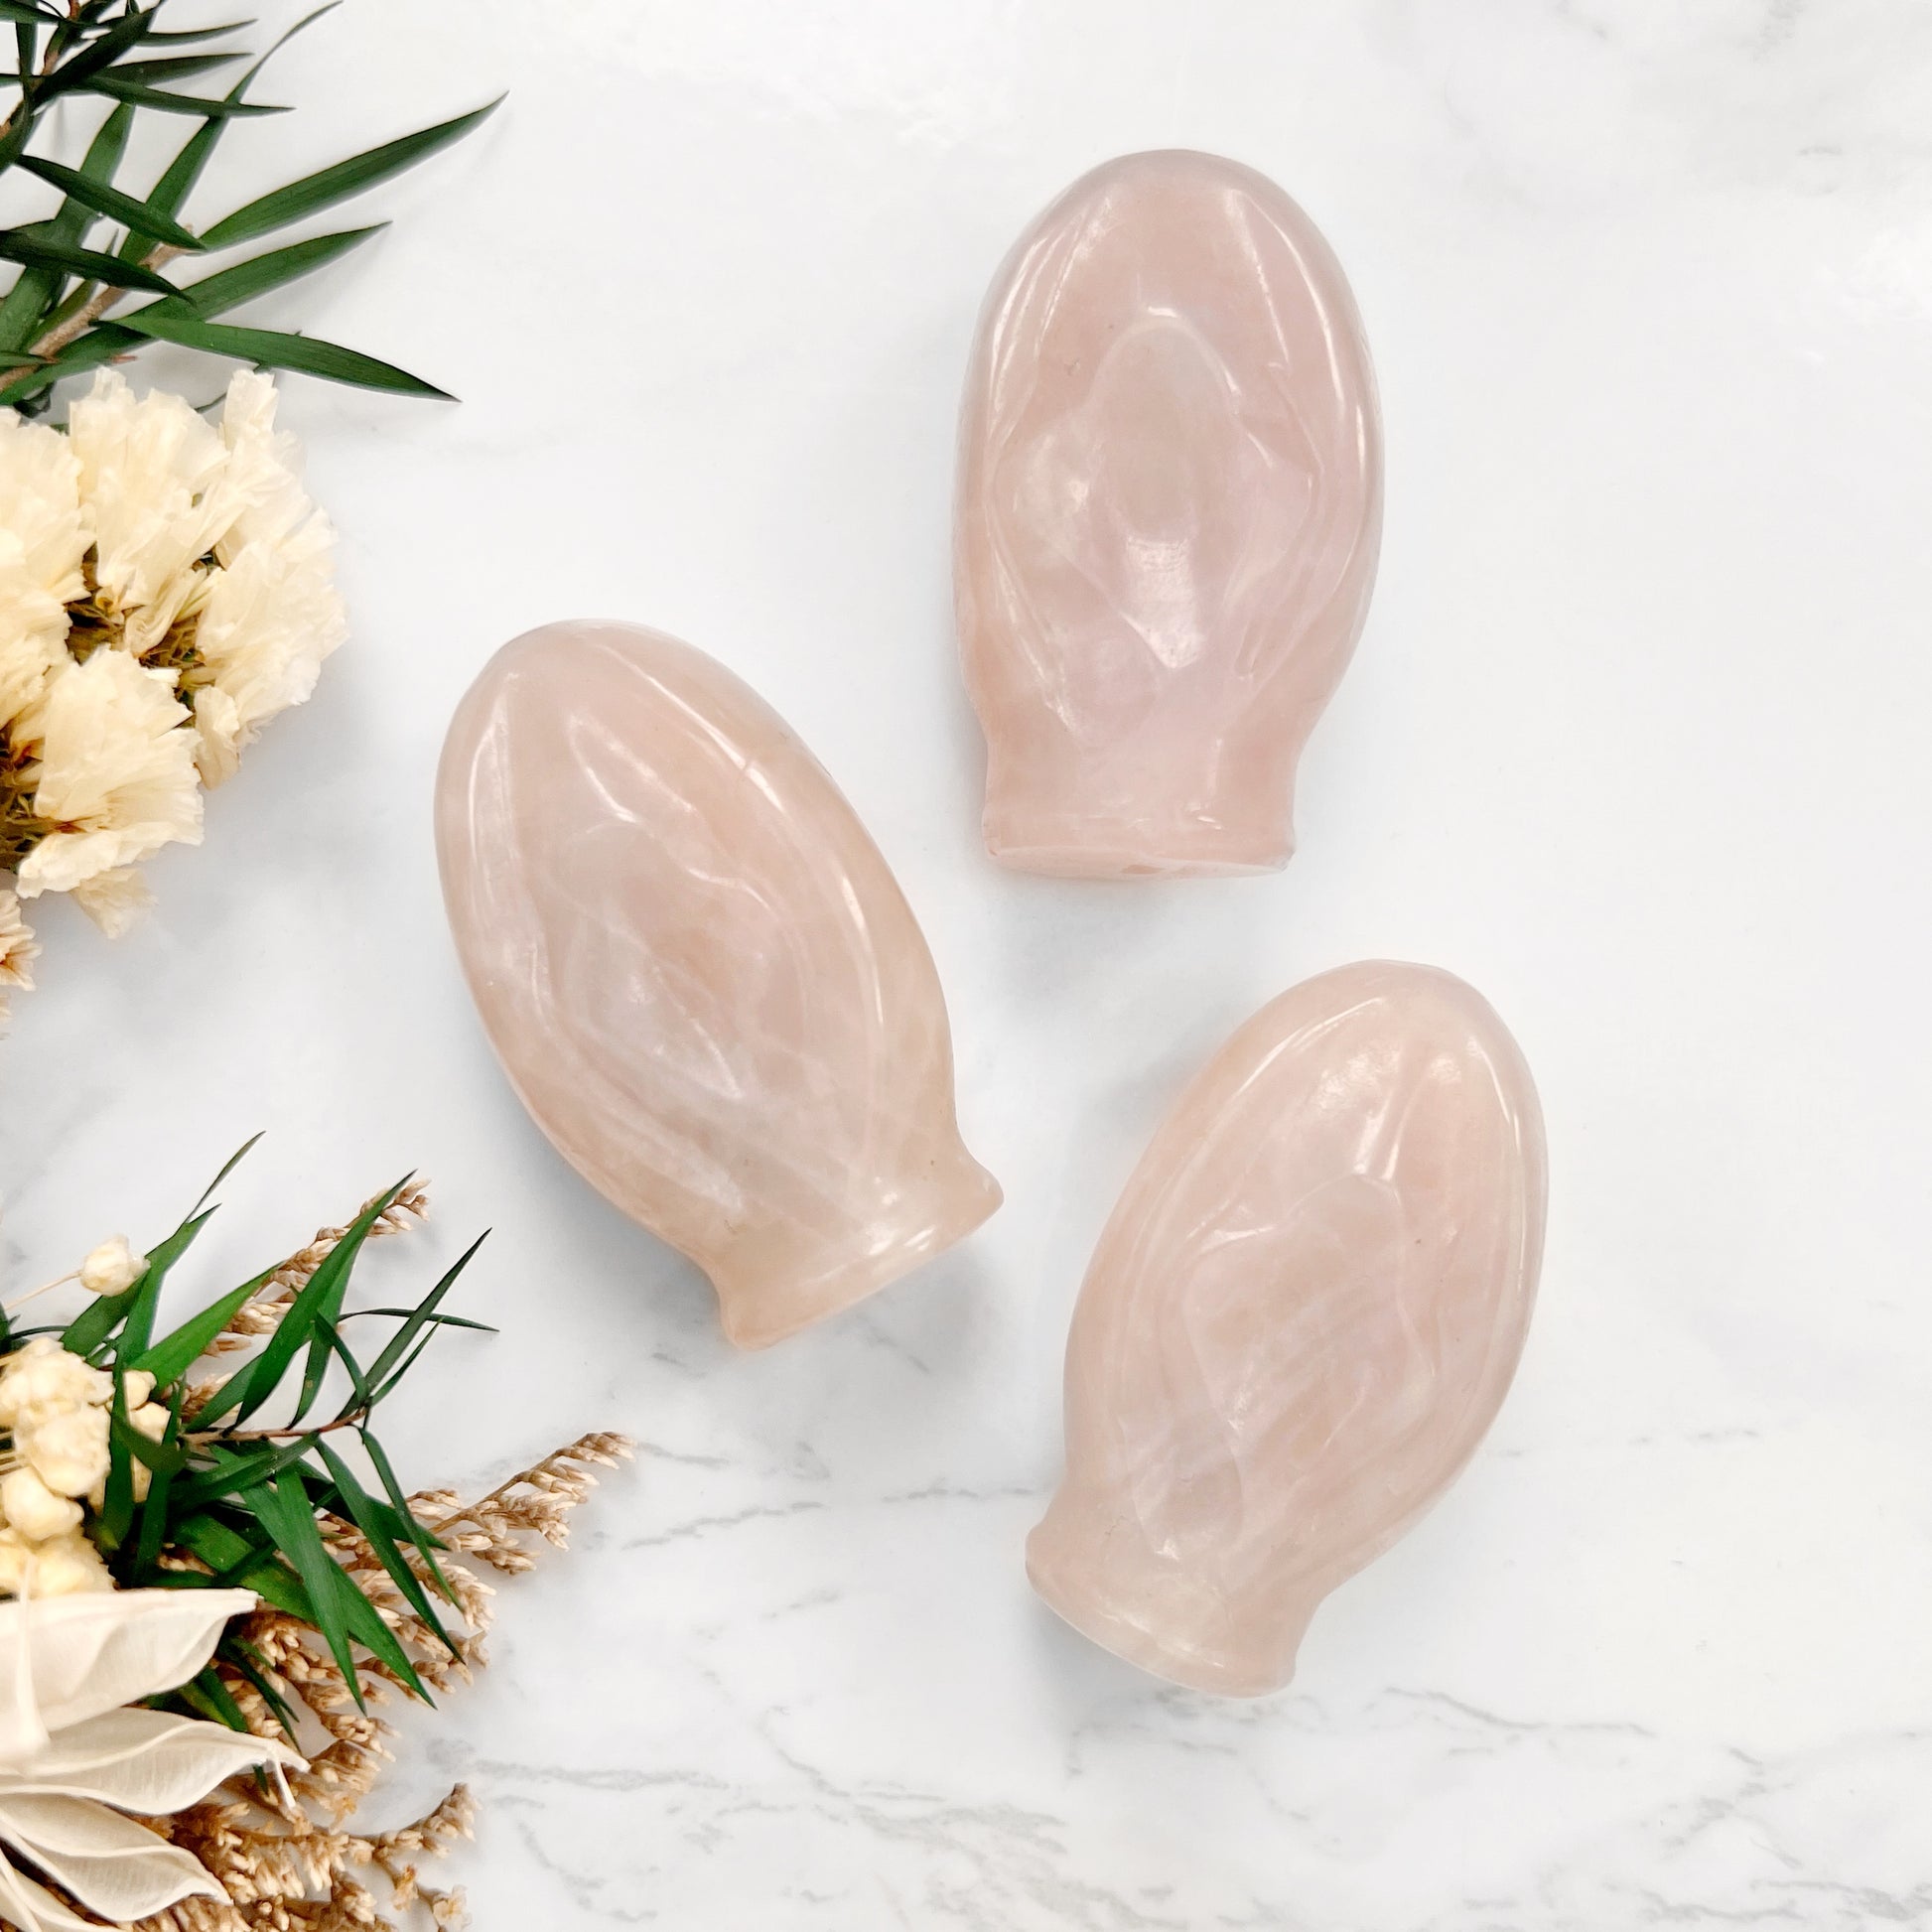 Trio of Love and Harmony: A stunning display of three Rose Quartz crystal vulva shapes, representing the ultimate symbol of unconditional love, compassion, and emotional healing. The gentle pink hues of these gemstones radiate harmony, forgiveness, and empathy.